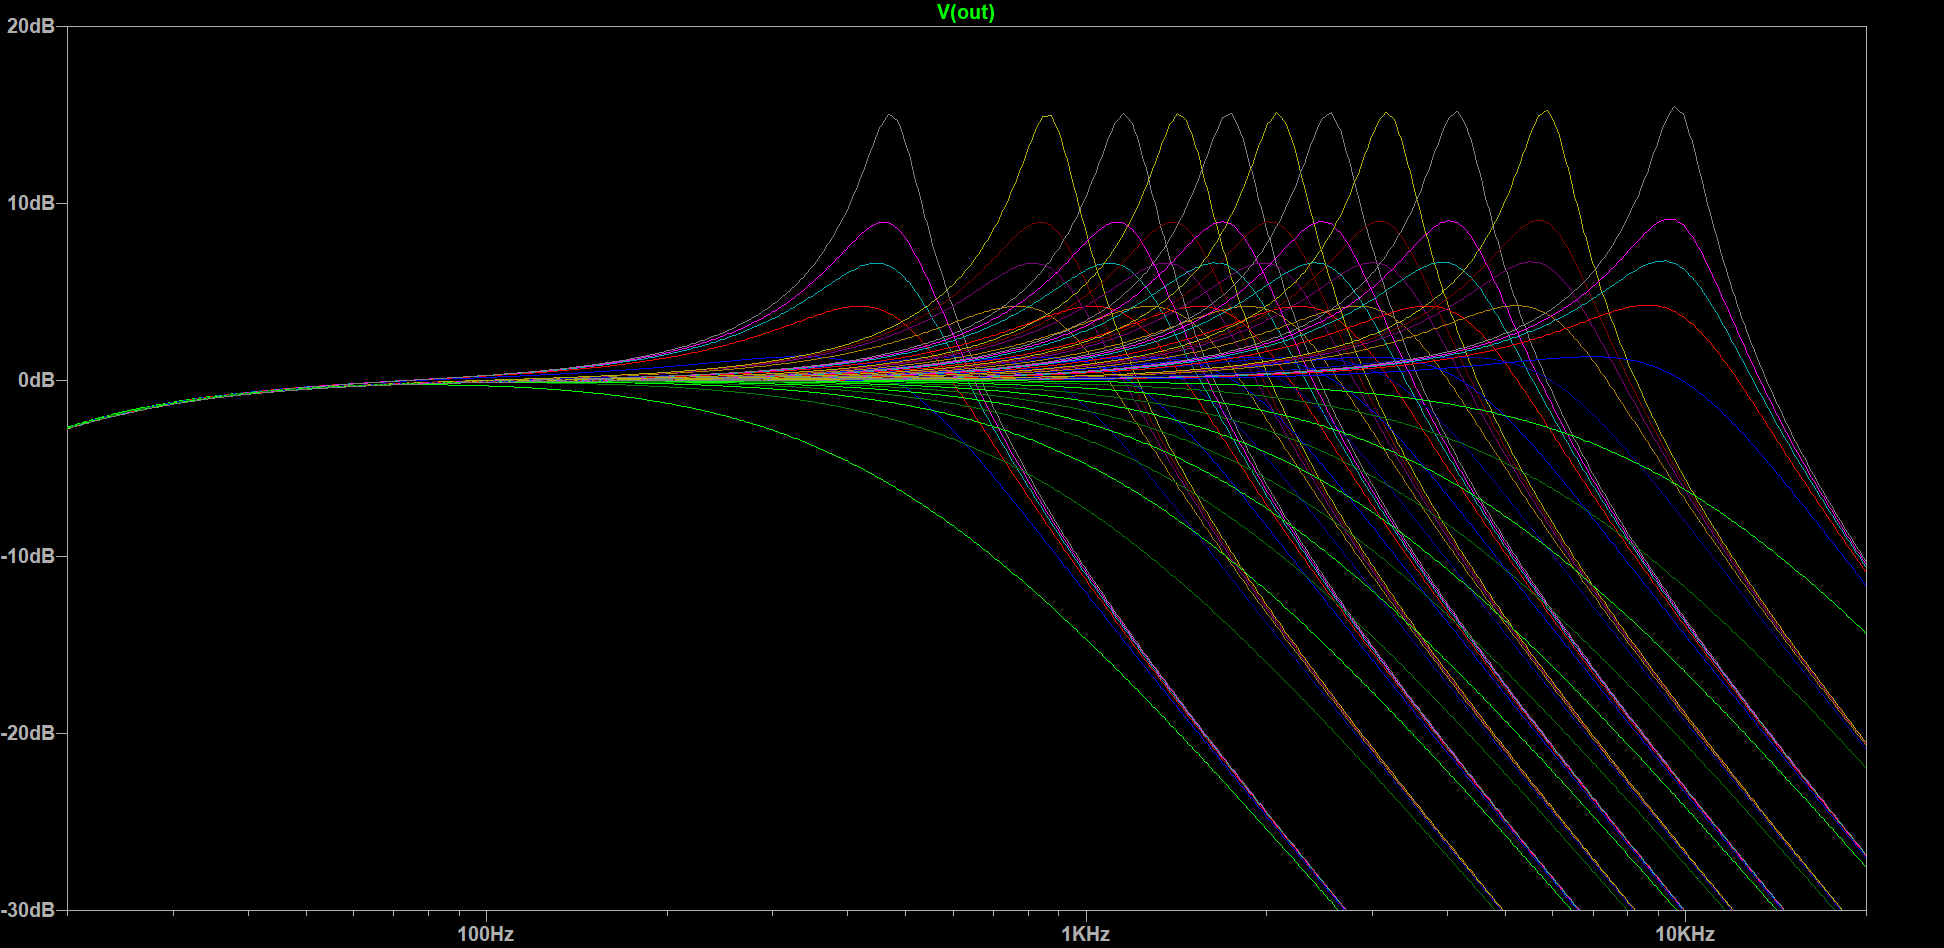 Bode plot of the simulated small-signal gain. The resonant peaks and frequency vary as expected